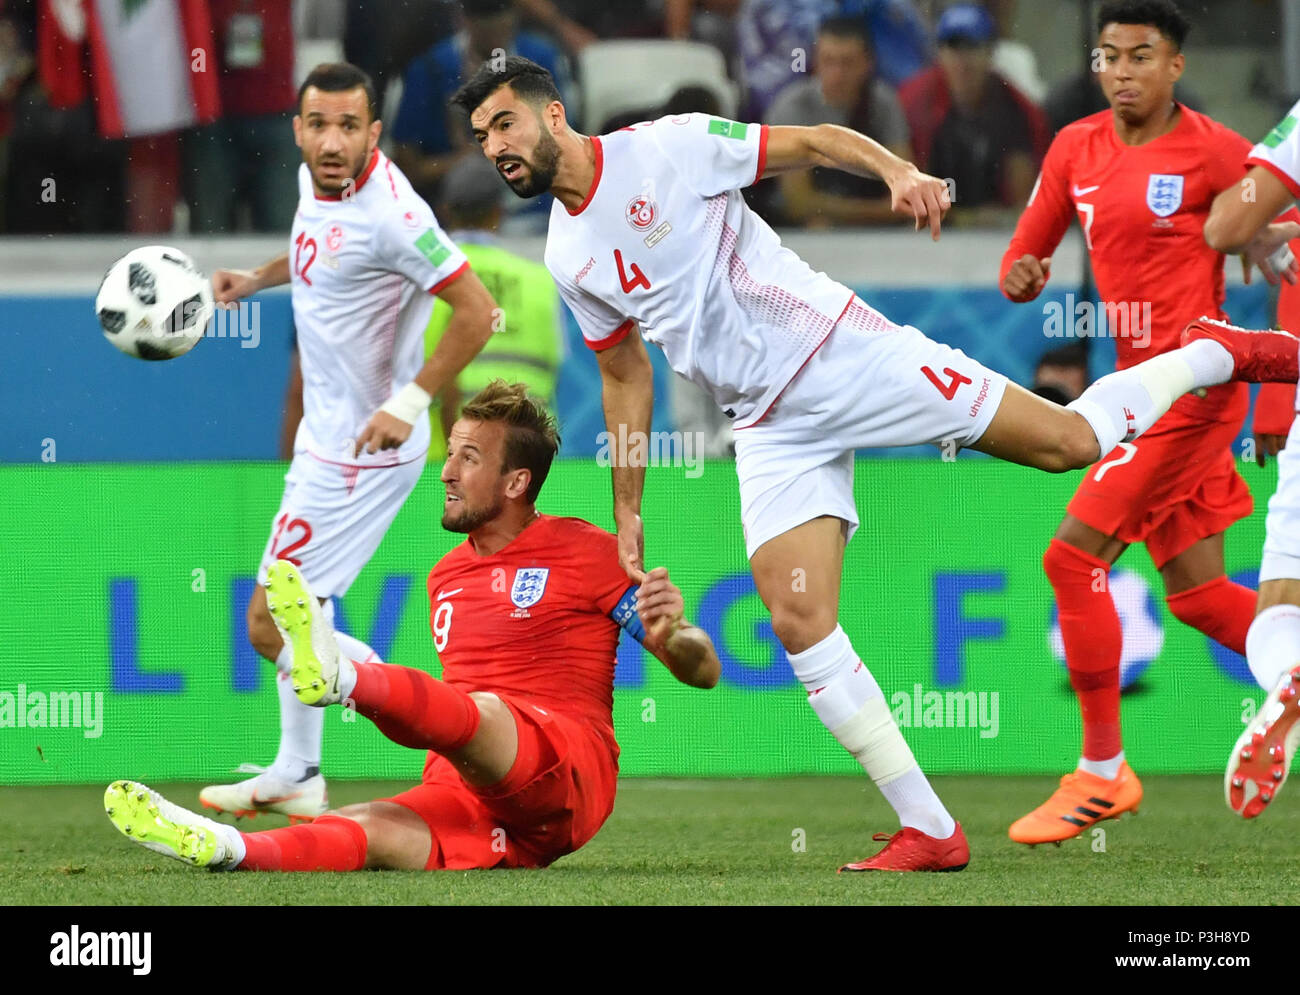 Volgograd, Russia. 18th June, 2018. Harry Kane?2nd L?of England vies with Yassine Meriah (2nd R) of Tunisia during a group G match between Tunisia and England at the 2018 FIFA World Cup in Volgograd, Russia, June 18, 2018. Credit: Liu Dawei/Xinhua/Alamy Live News Stock Photo